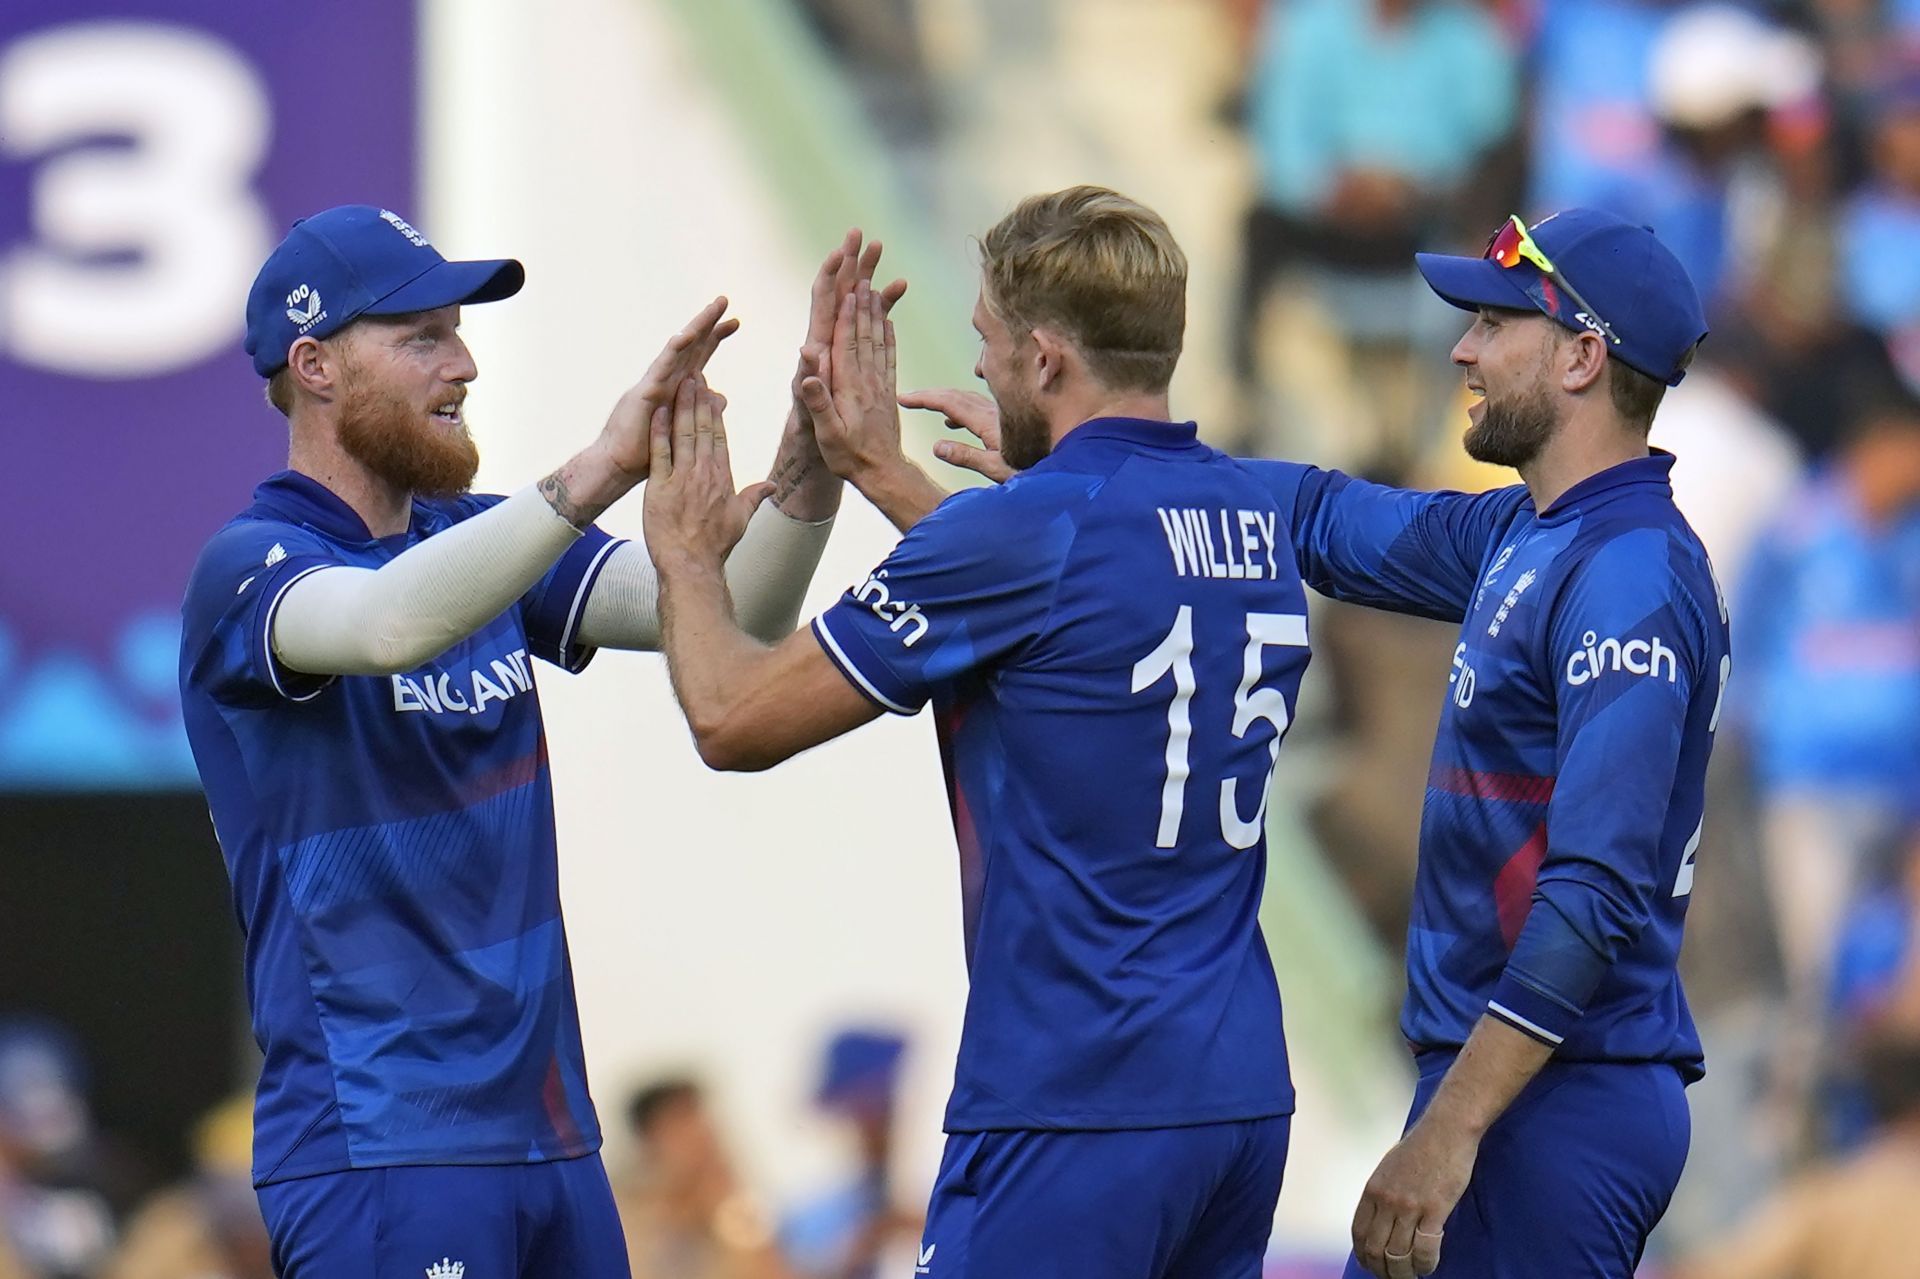 England were considered one of the favorites heading into the World Cup. [P/C: AP]